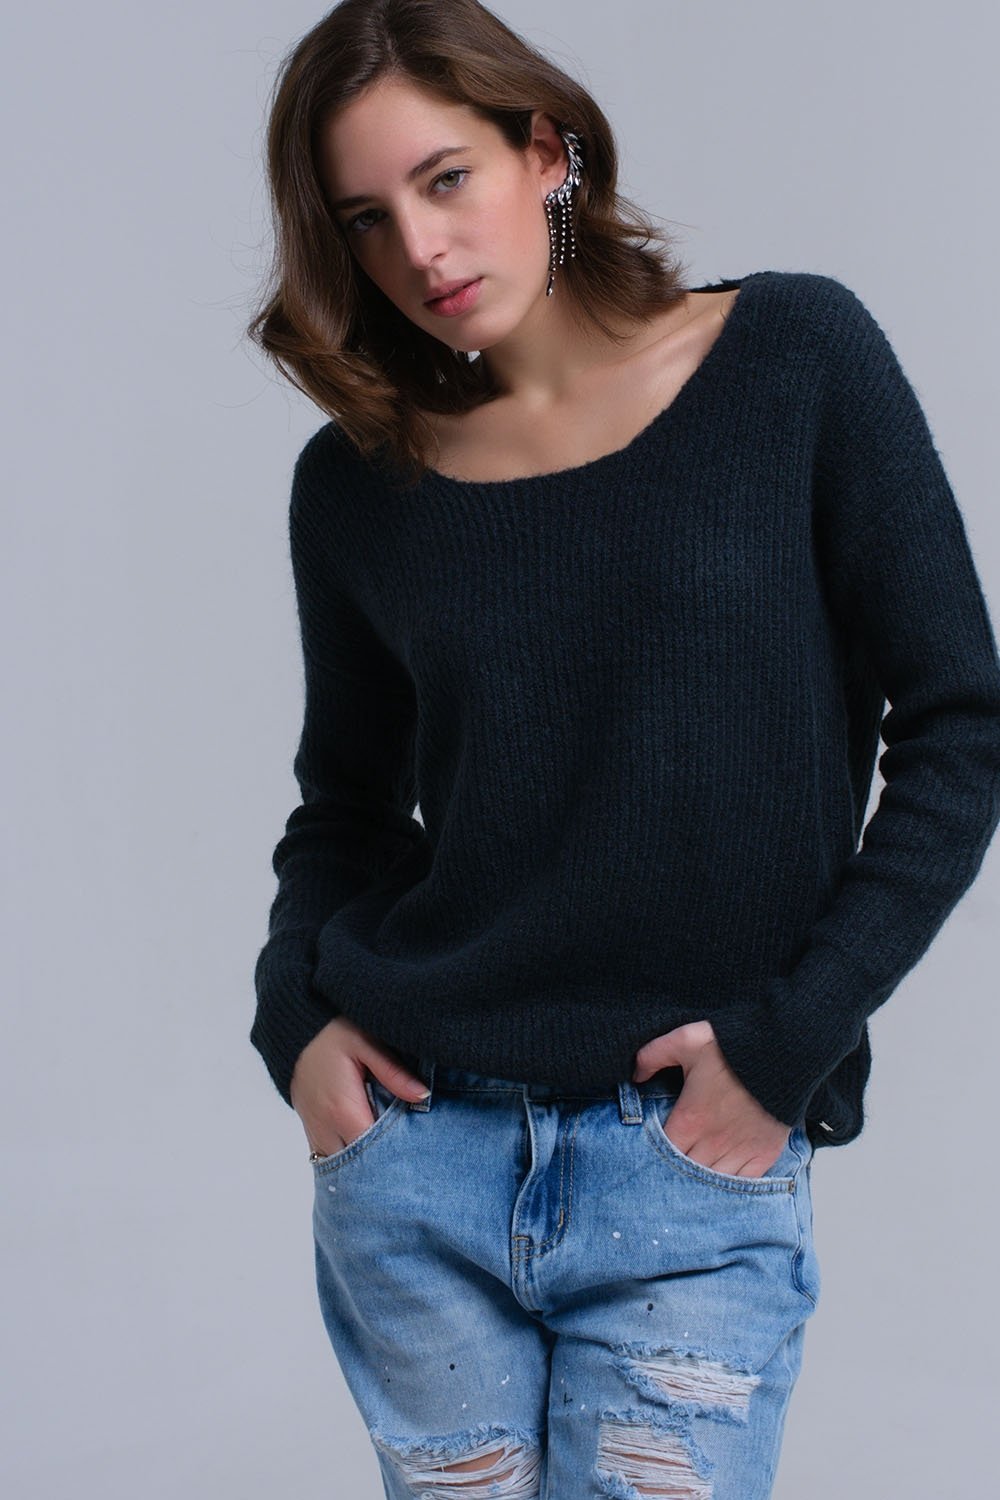 Green Knitted Sweater With Tie-Back Closure